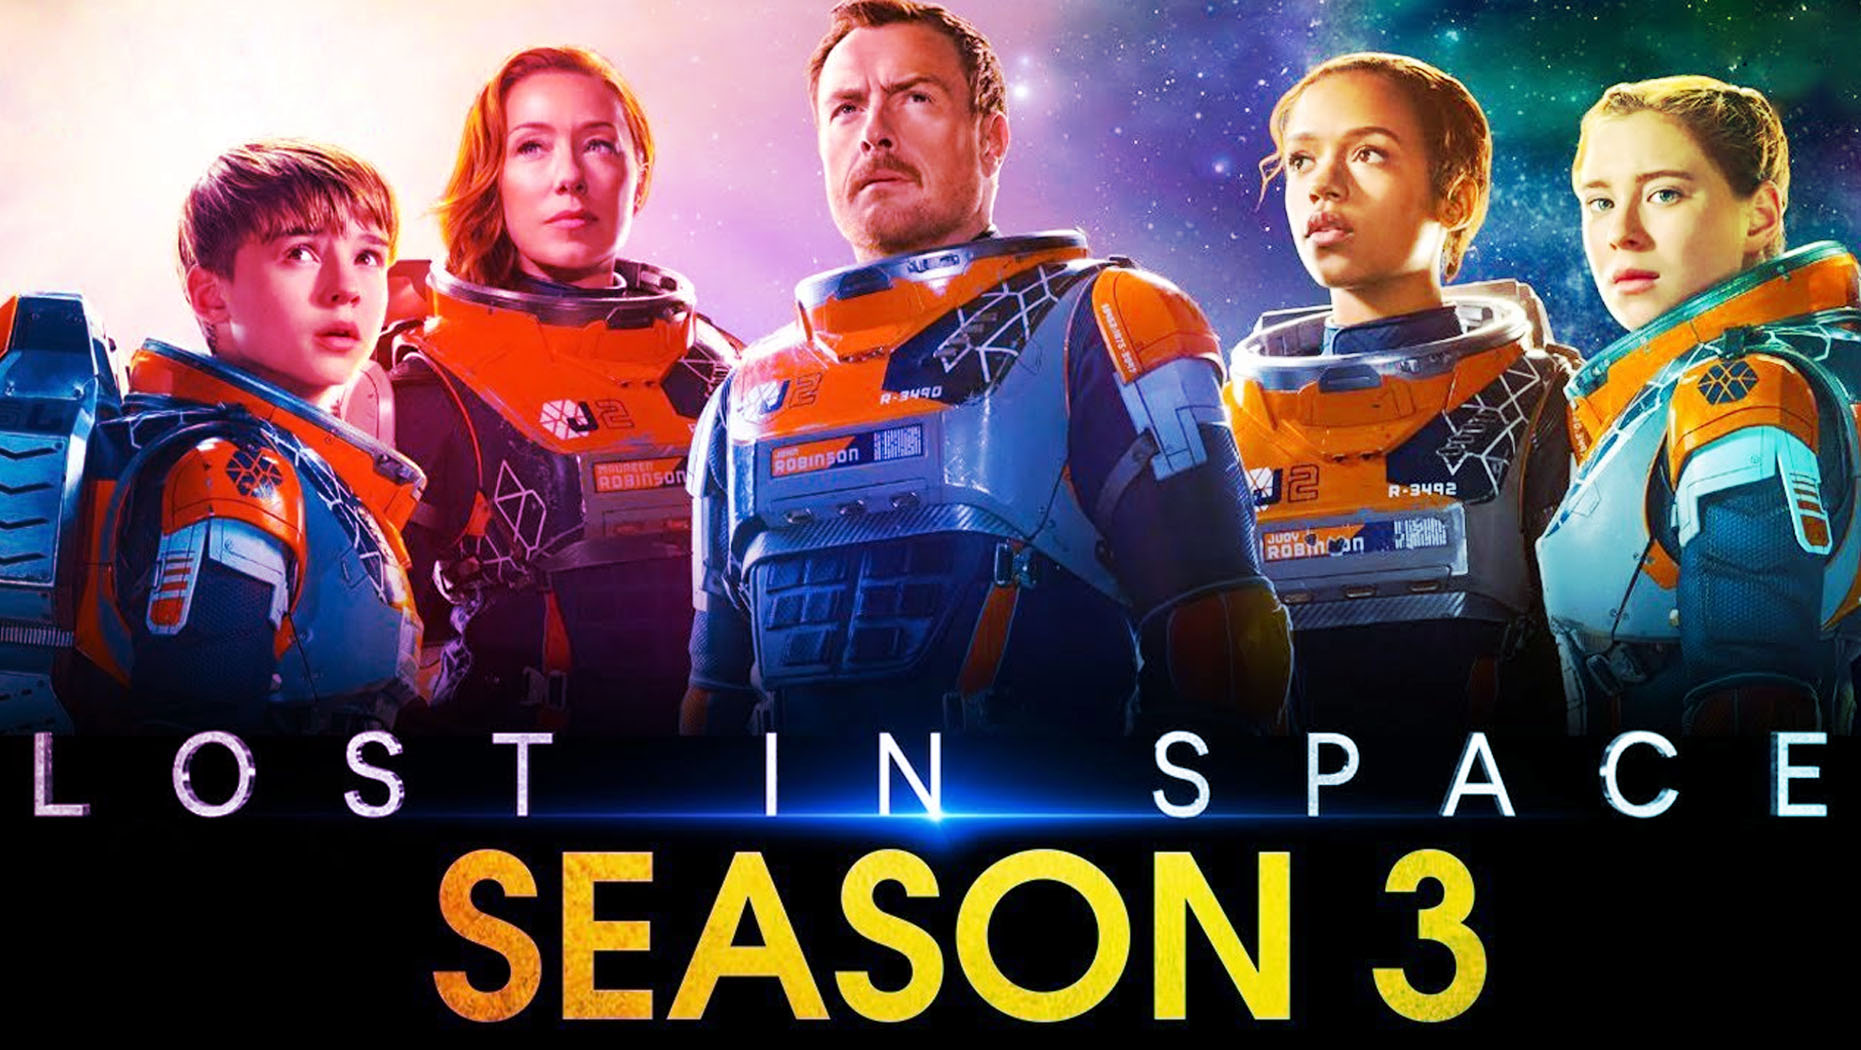 Lost In Space Season 3 Release Date, Cast, and Plot Details